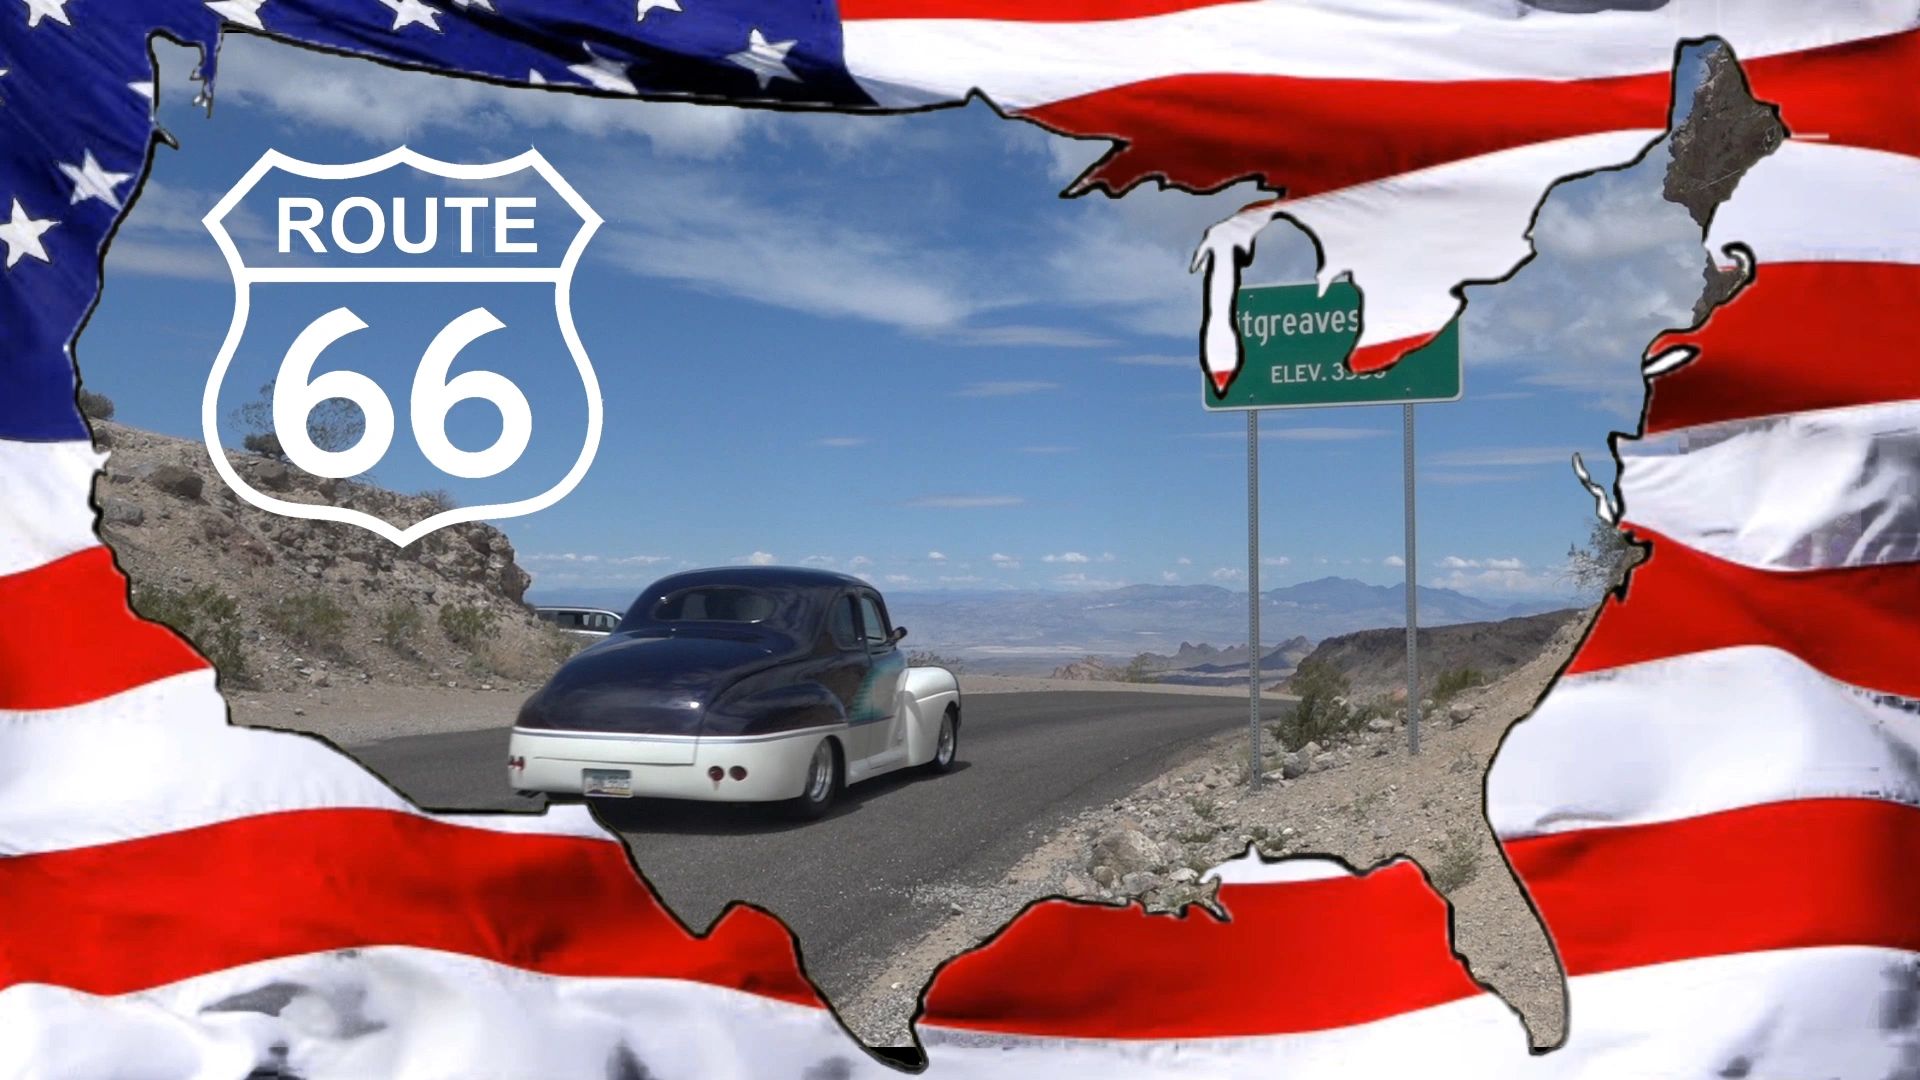 Route 66 Experience - Travel 66, Route 66 Travel